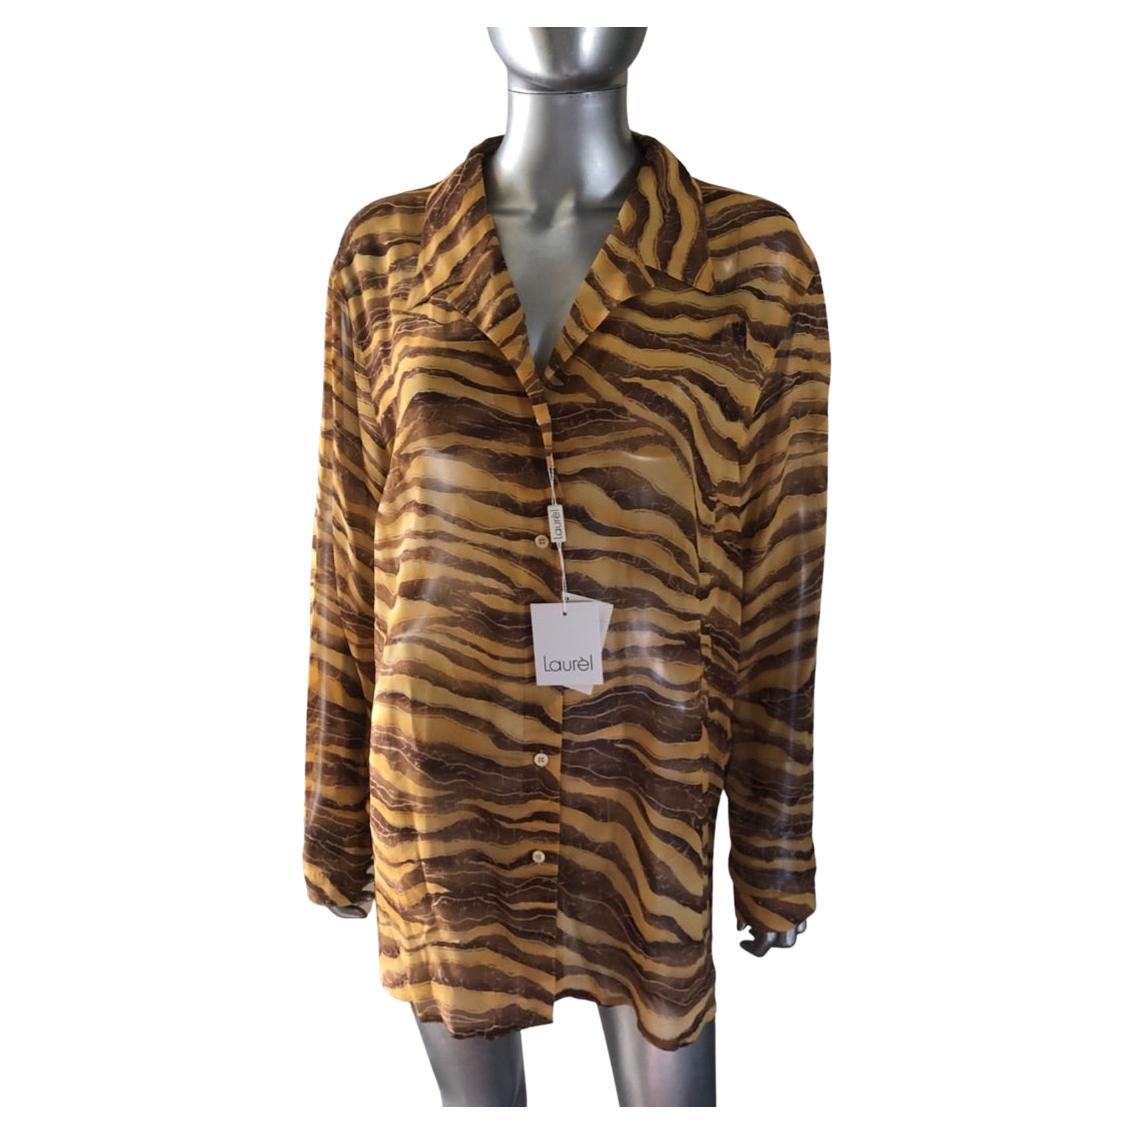 This blouse is so chic and modern. A vintage find in the closet of a Palm Springs Fashionista, NWT., never worn. The fabric is a European chiffon in a zebra animal brint of golds and browns. Made in Czech Republic. Rare size 44 Euro or size 14 US.